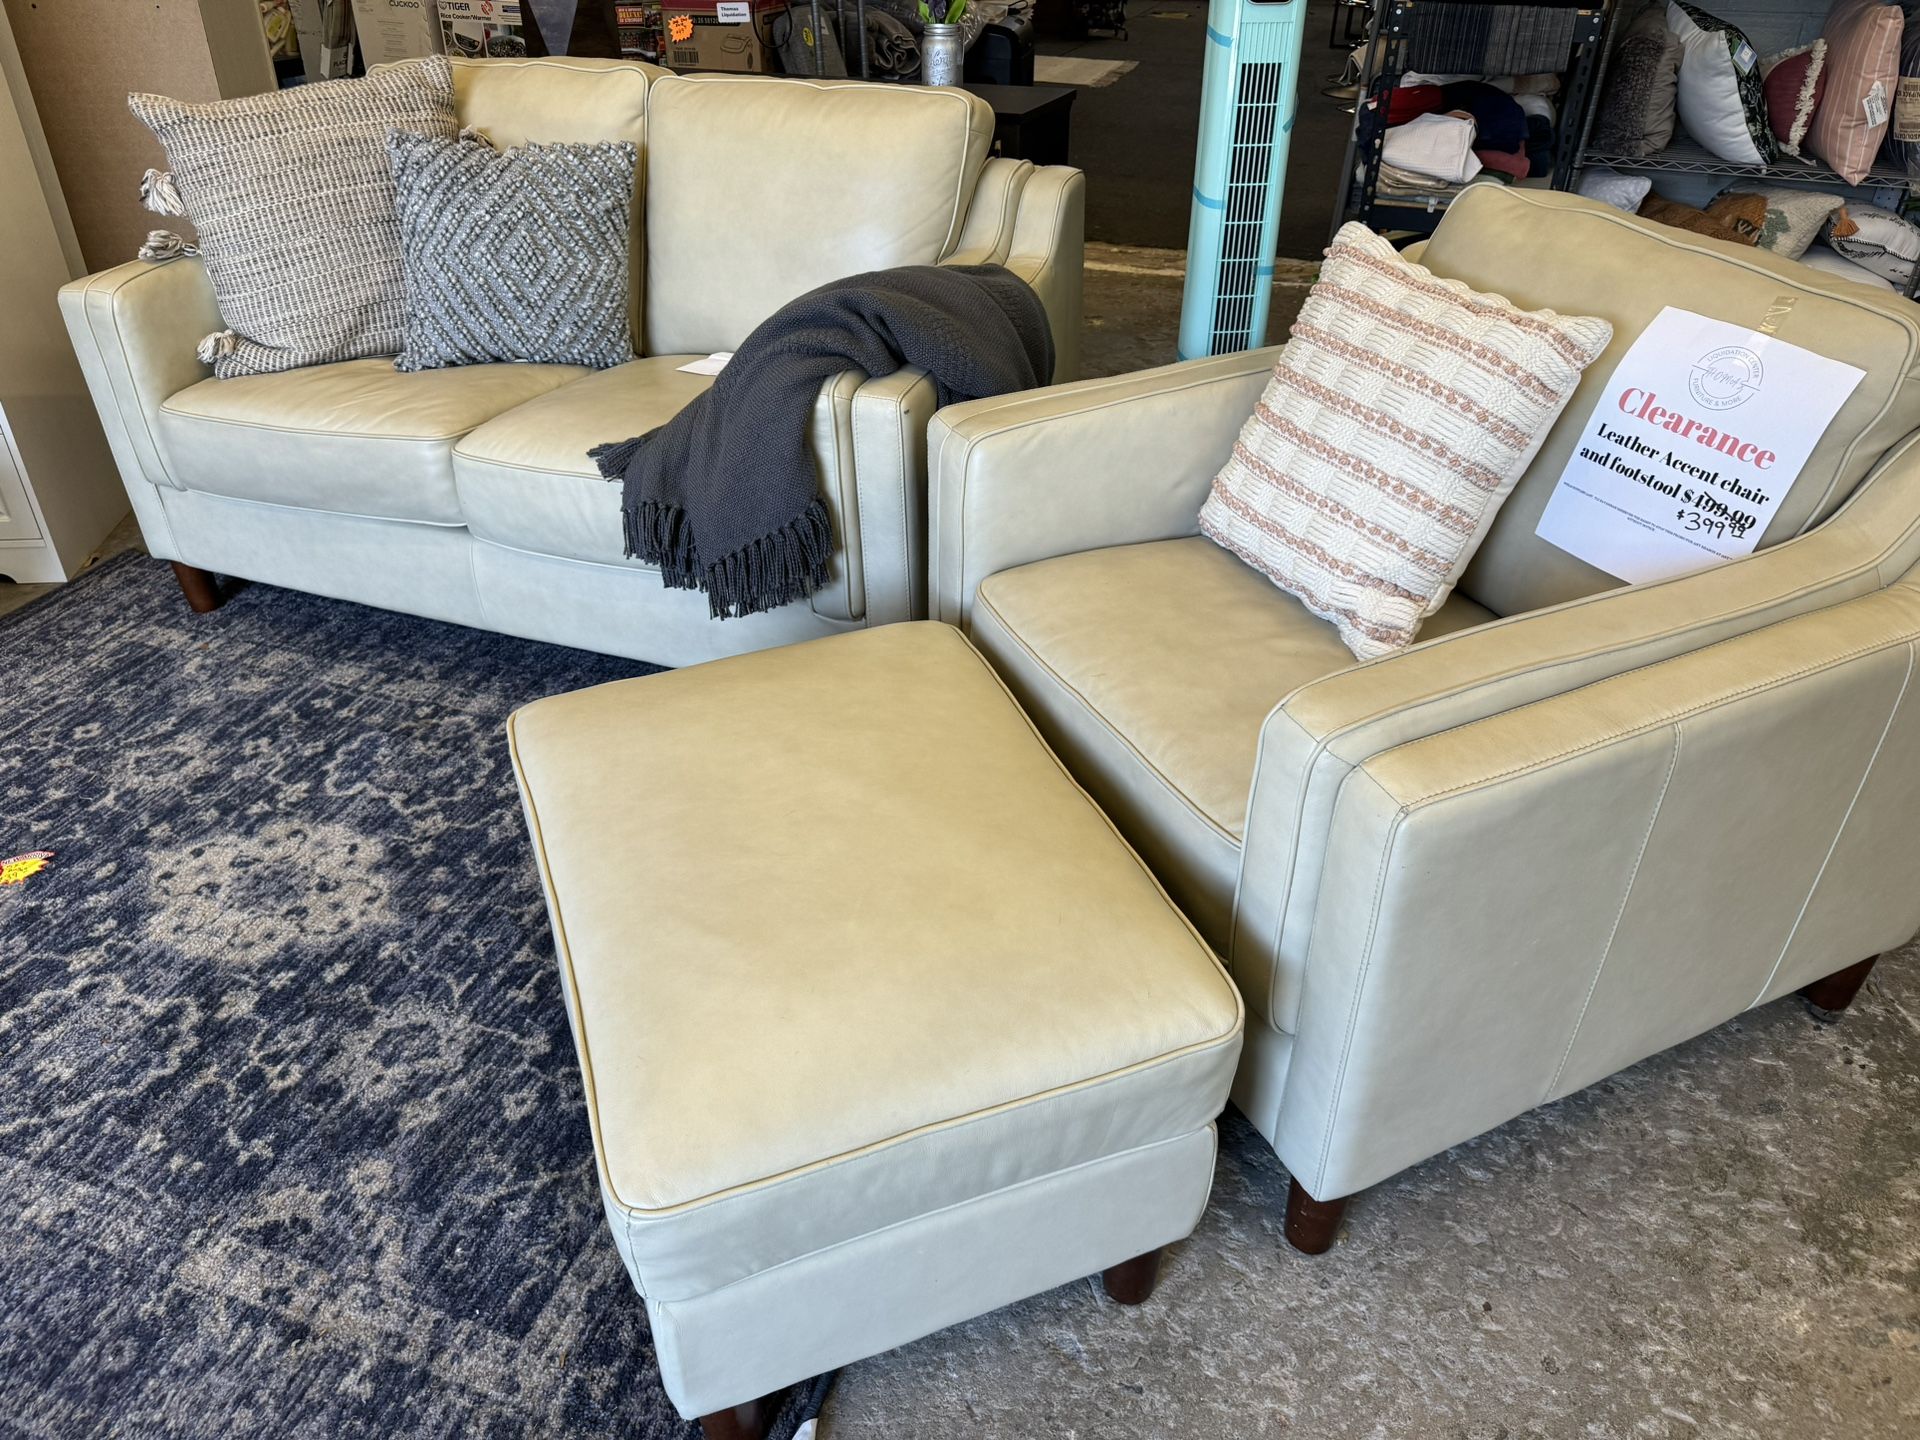 Loveseat Armchair And Ottoman Top Grain Leather Light Cream $900 For The Set 